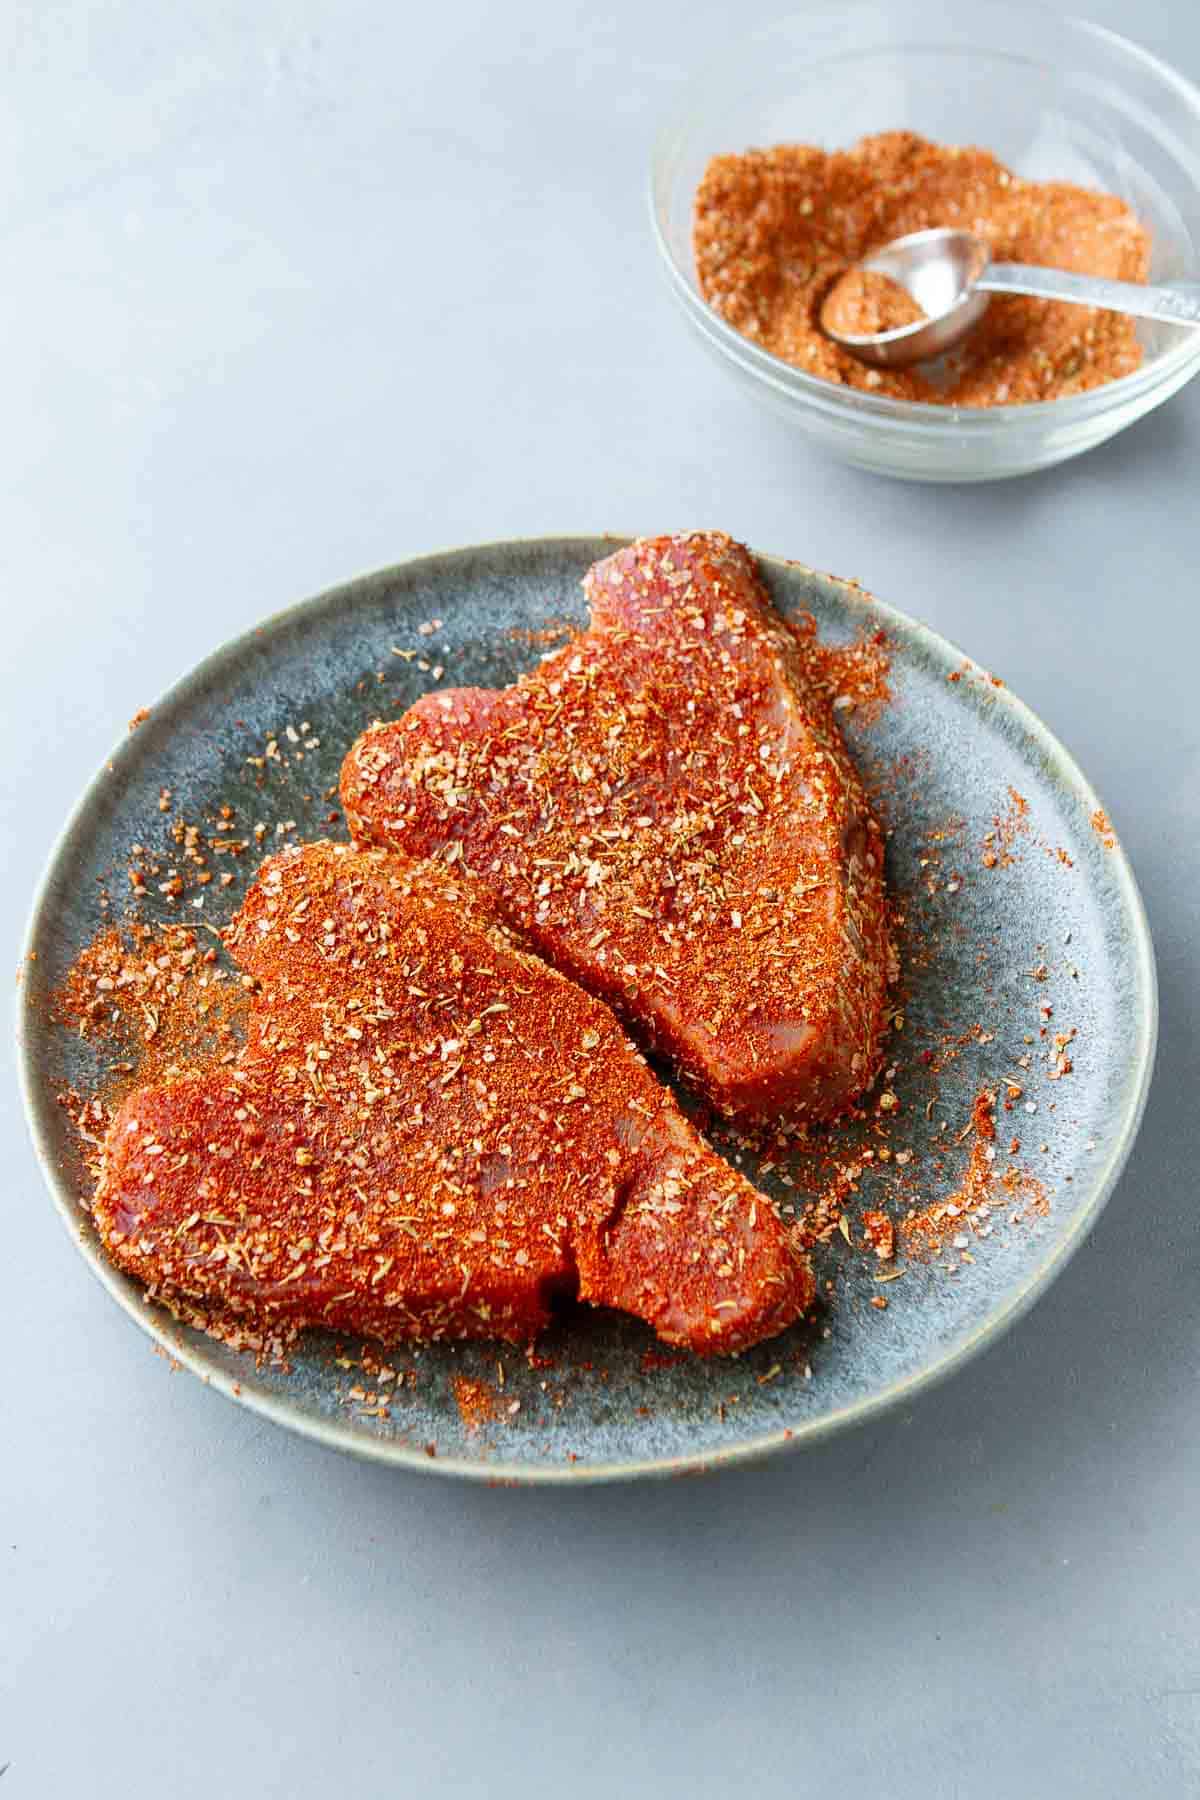 Spice-rubbed tuna steaks on a blue-gray plate.